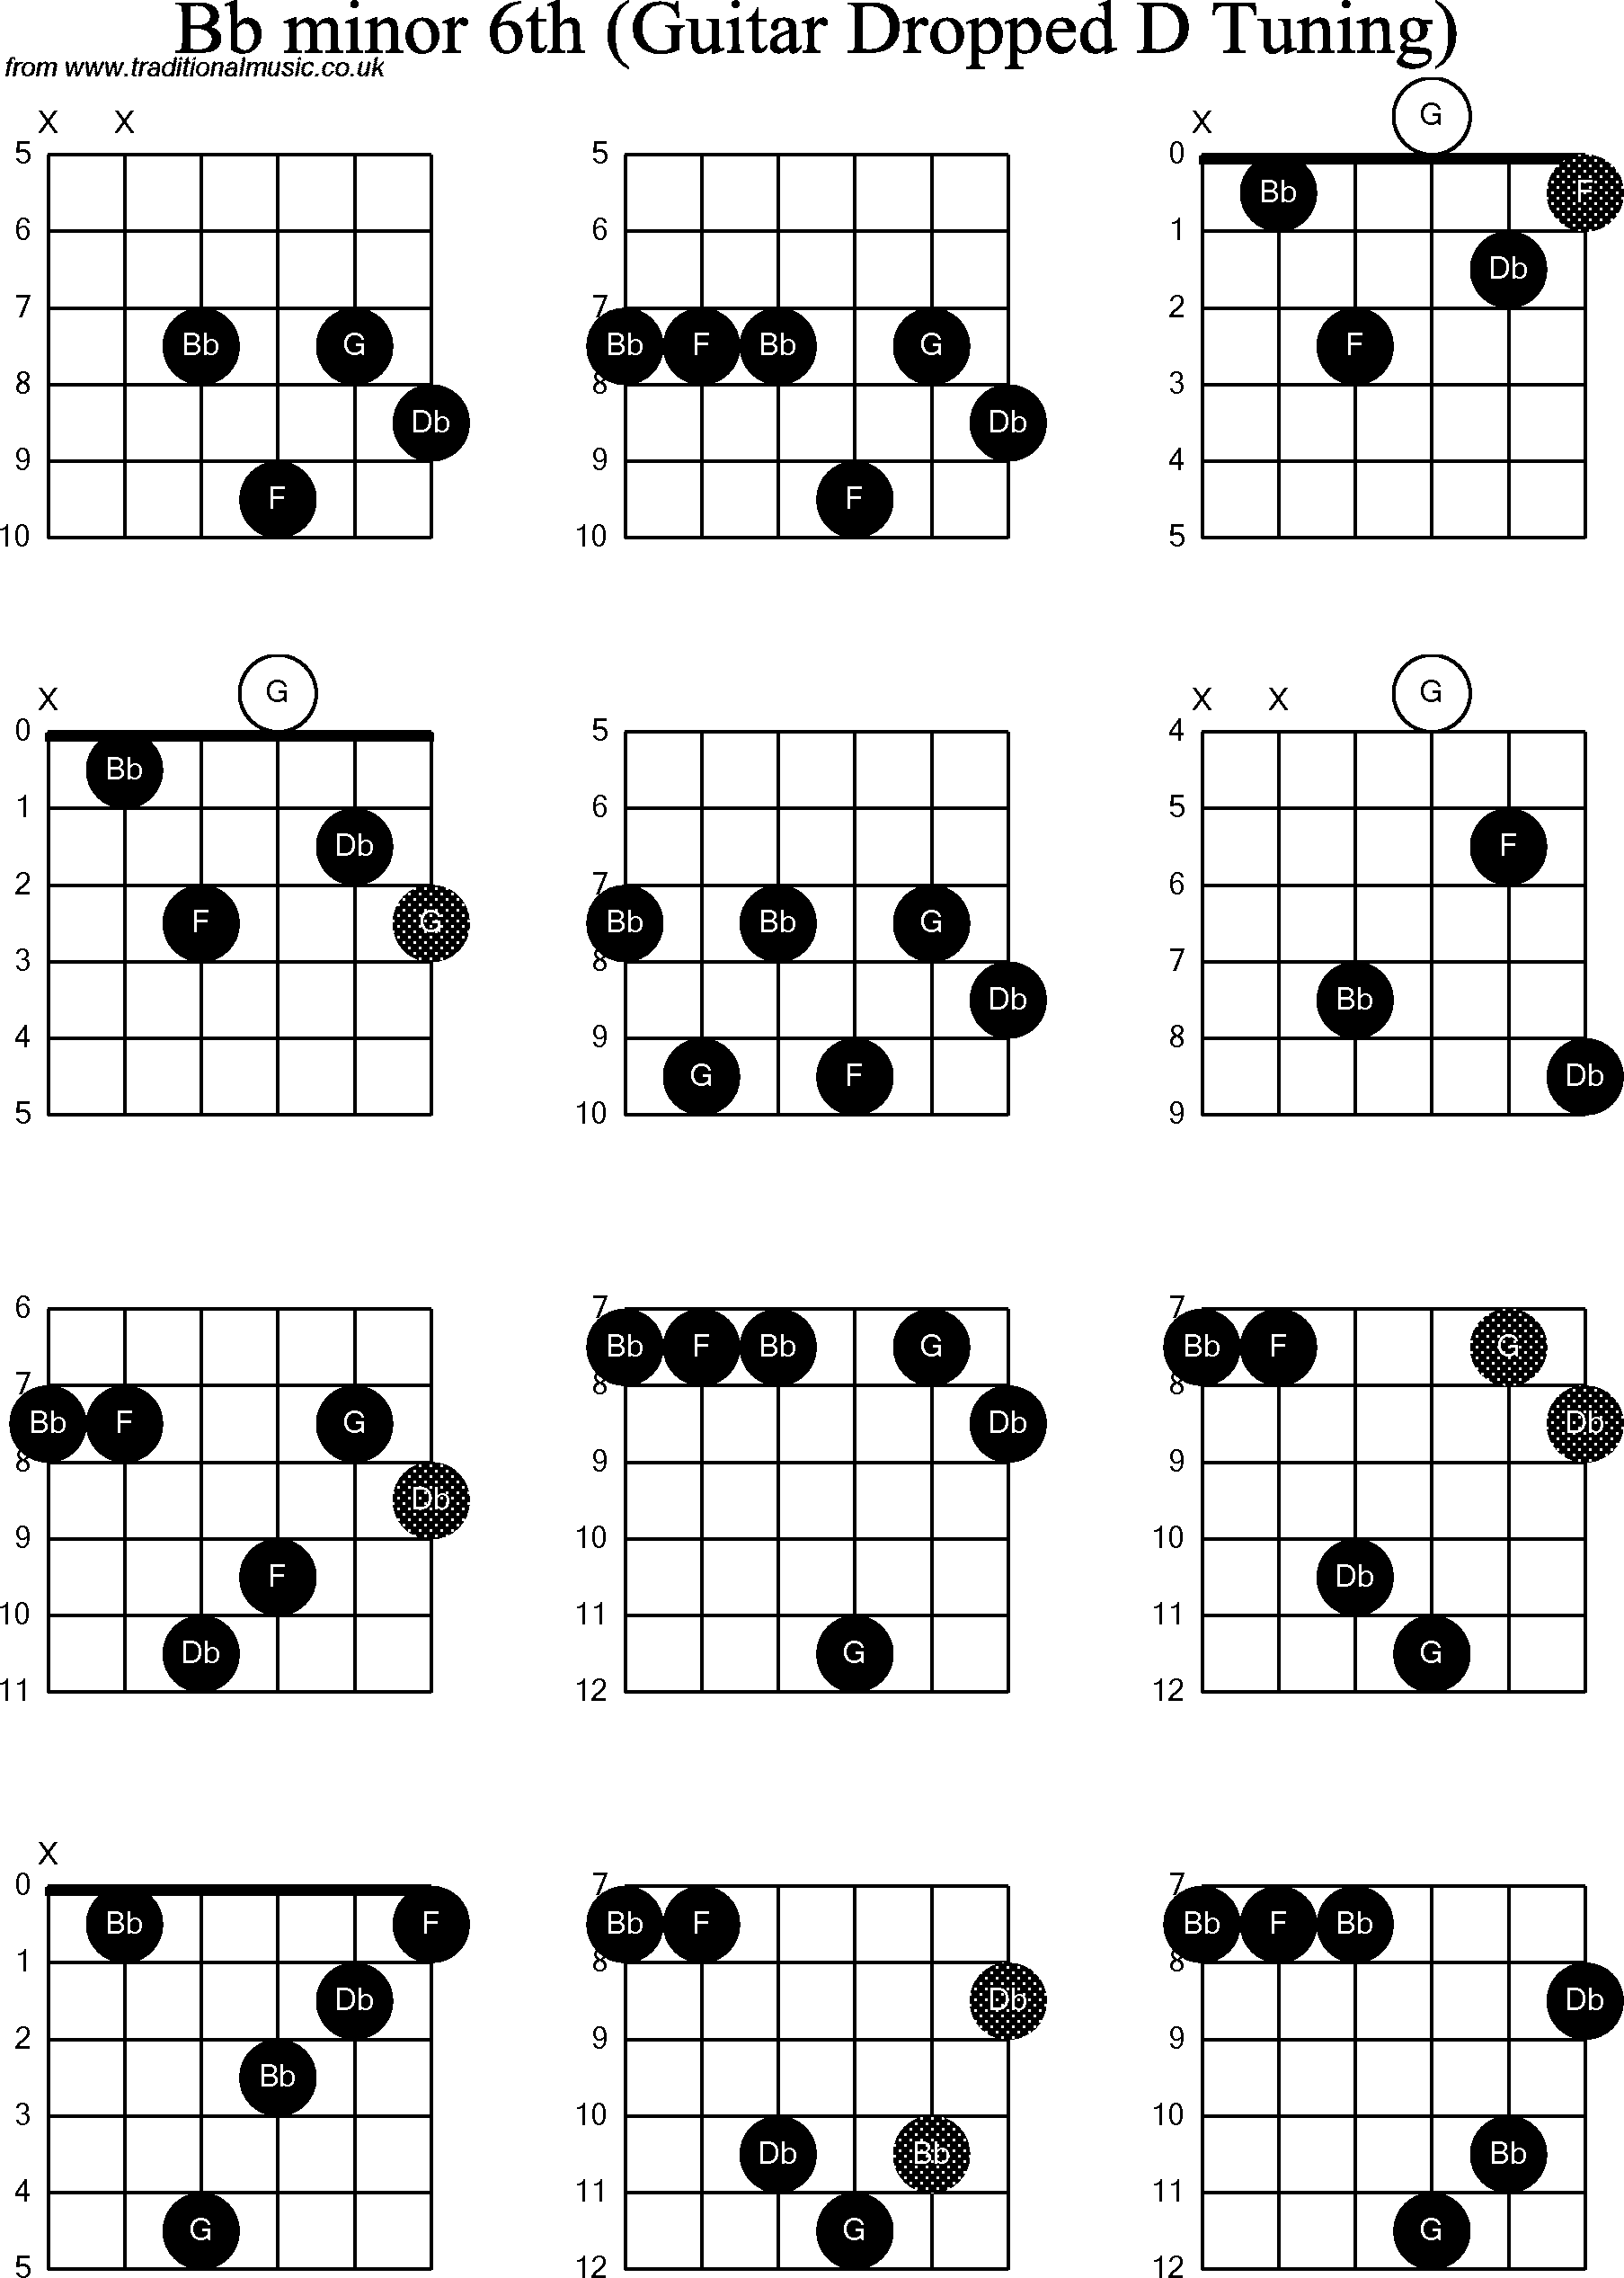 Chord diagrams for dropped D Guitar(DADGBE), Bb Minor6th